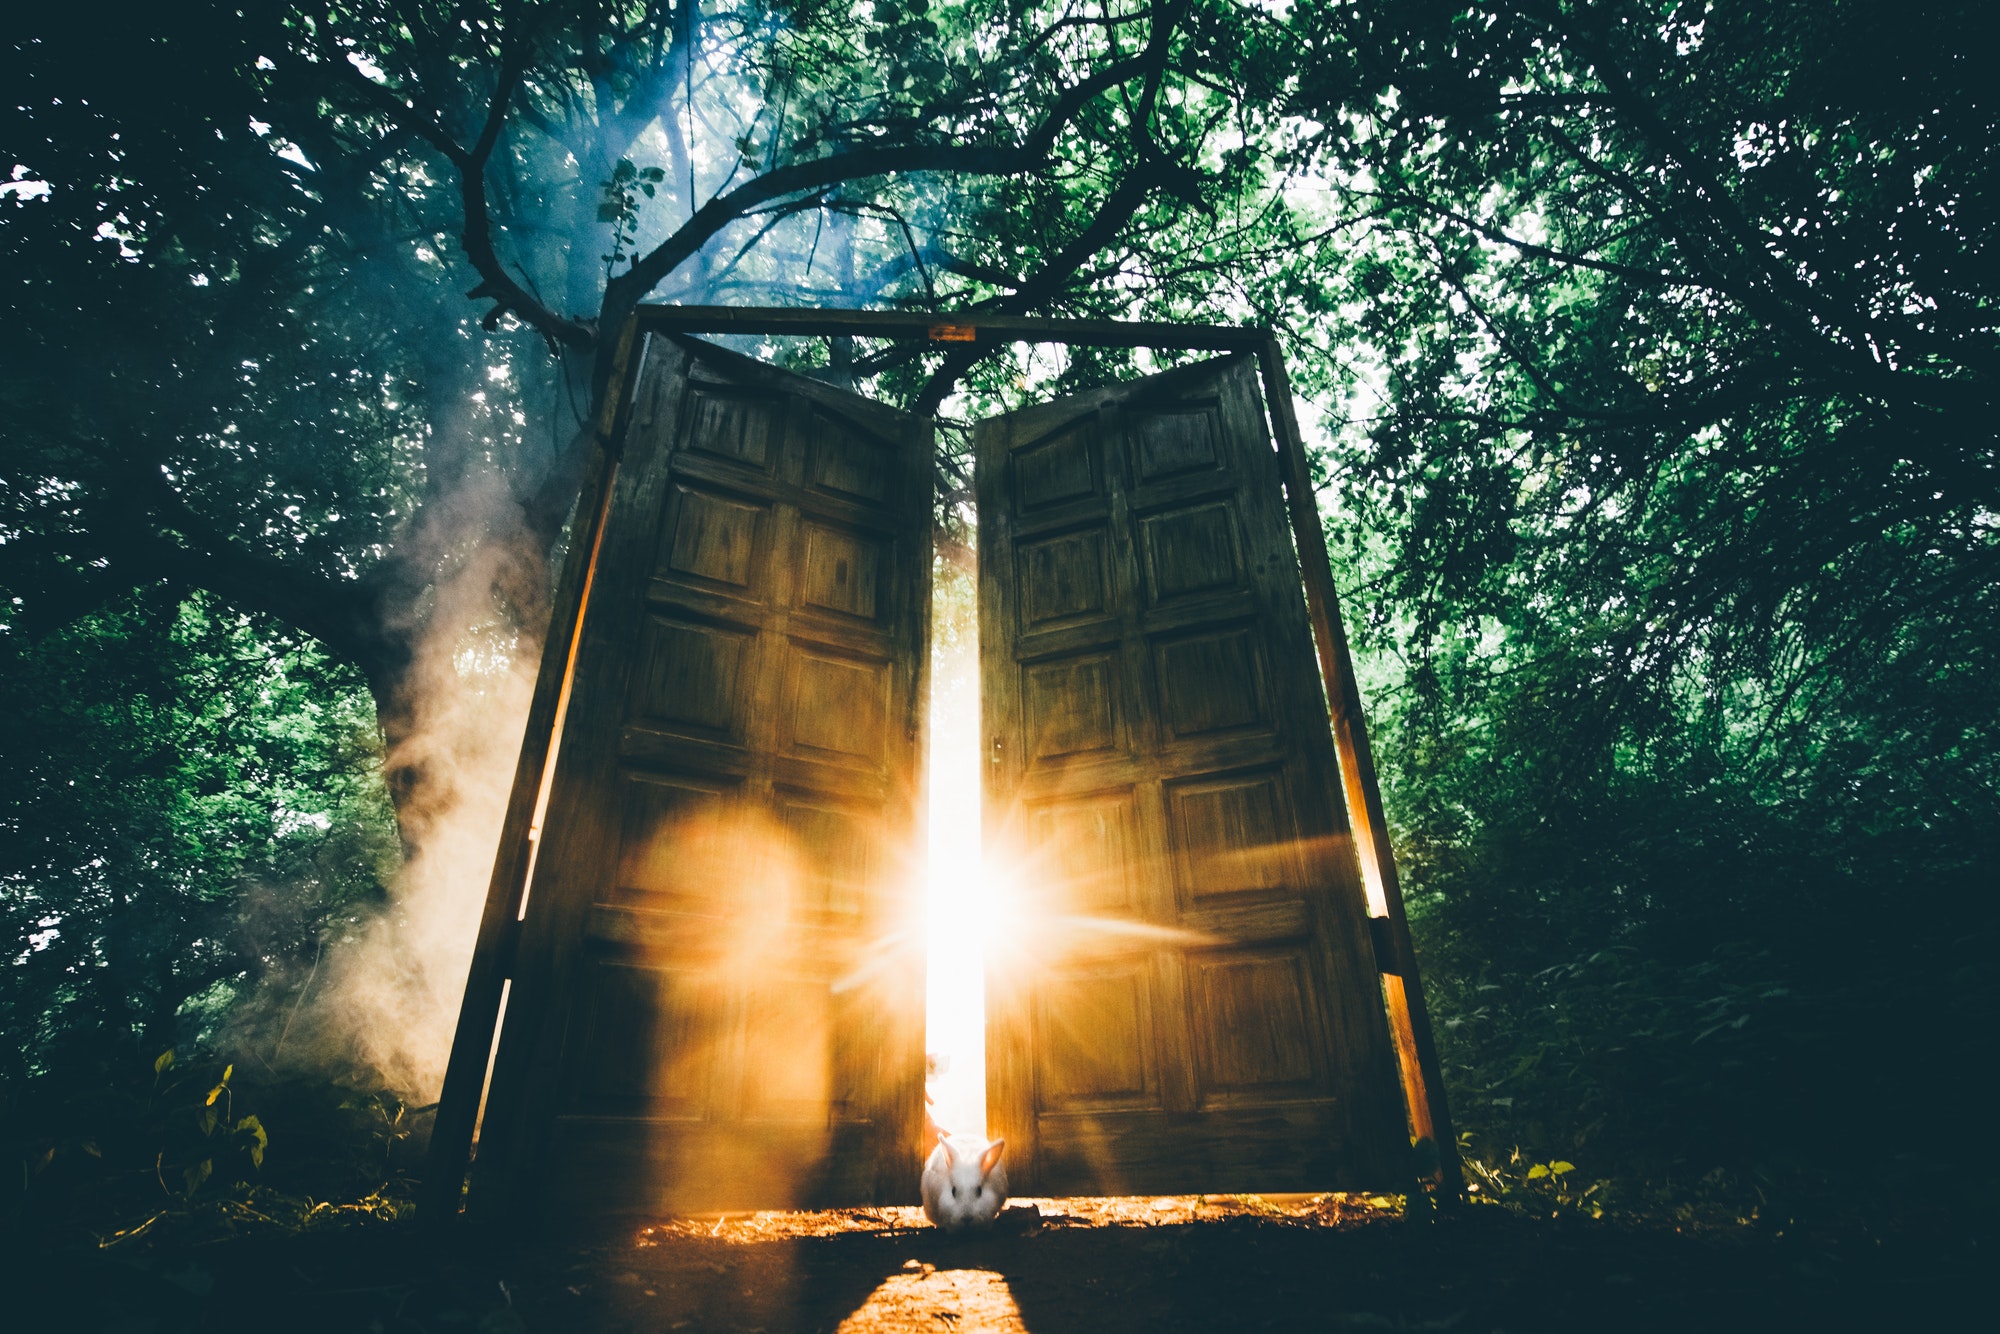 The fairytale door with back light in the mystic forest.